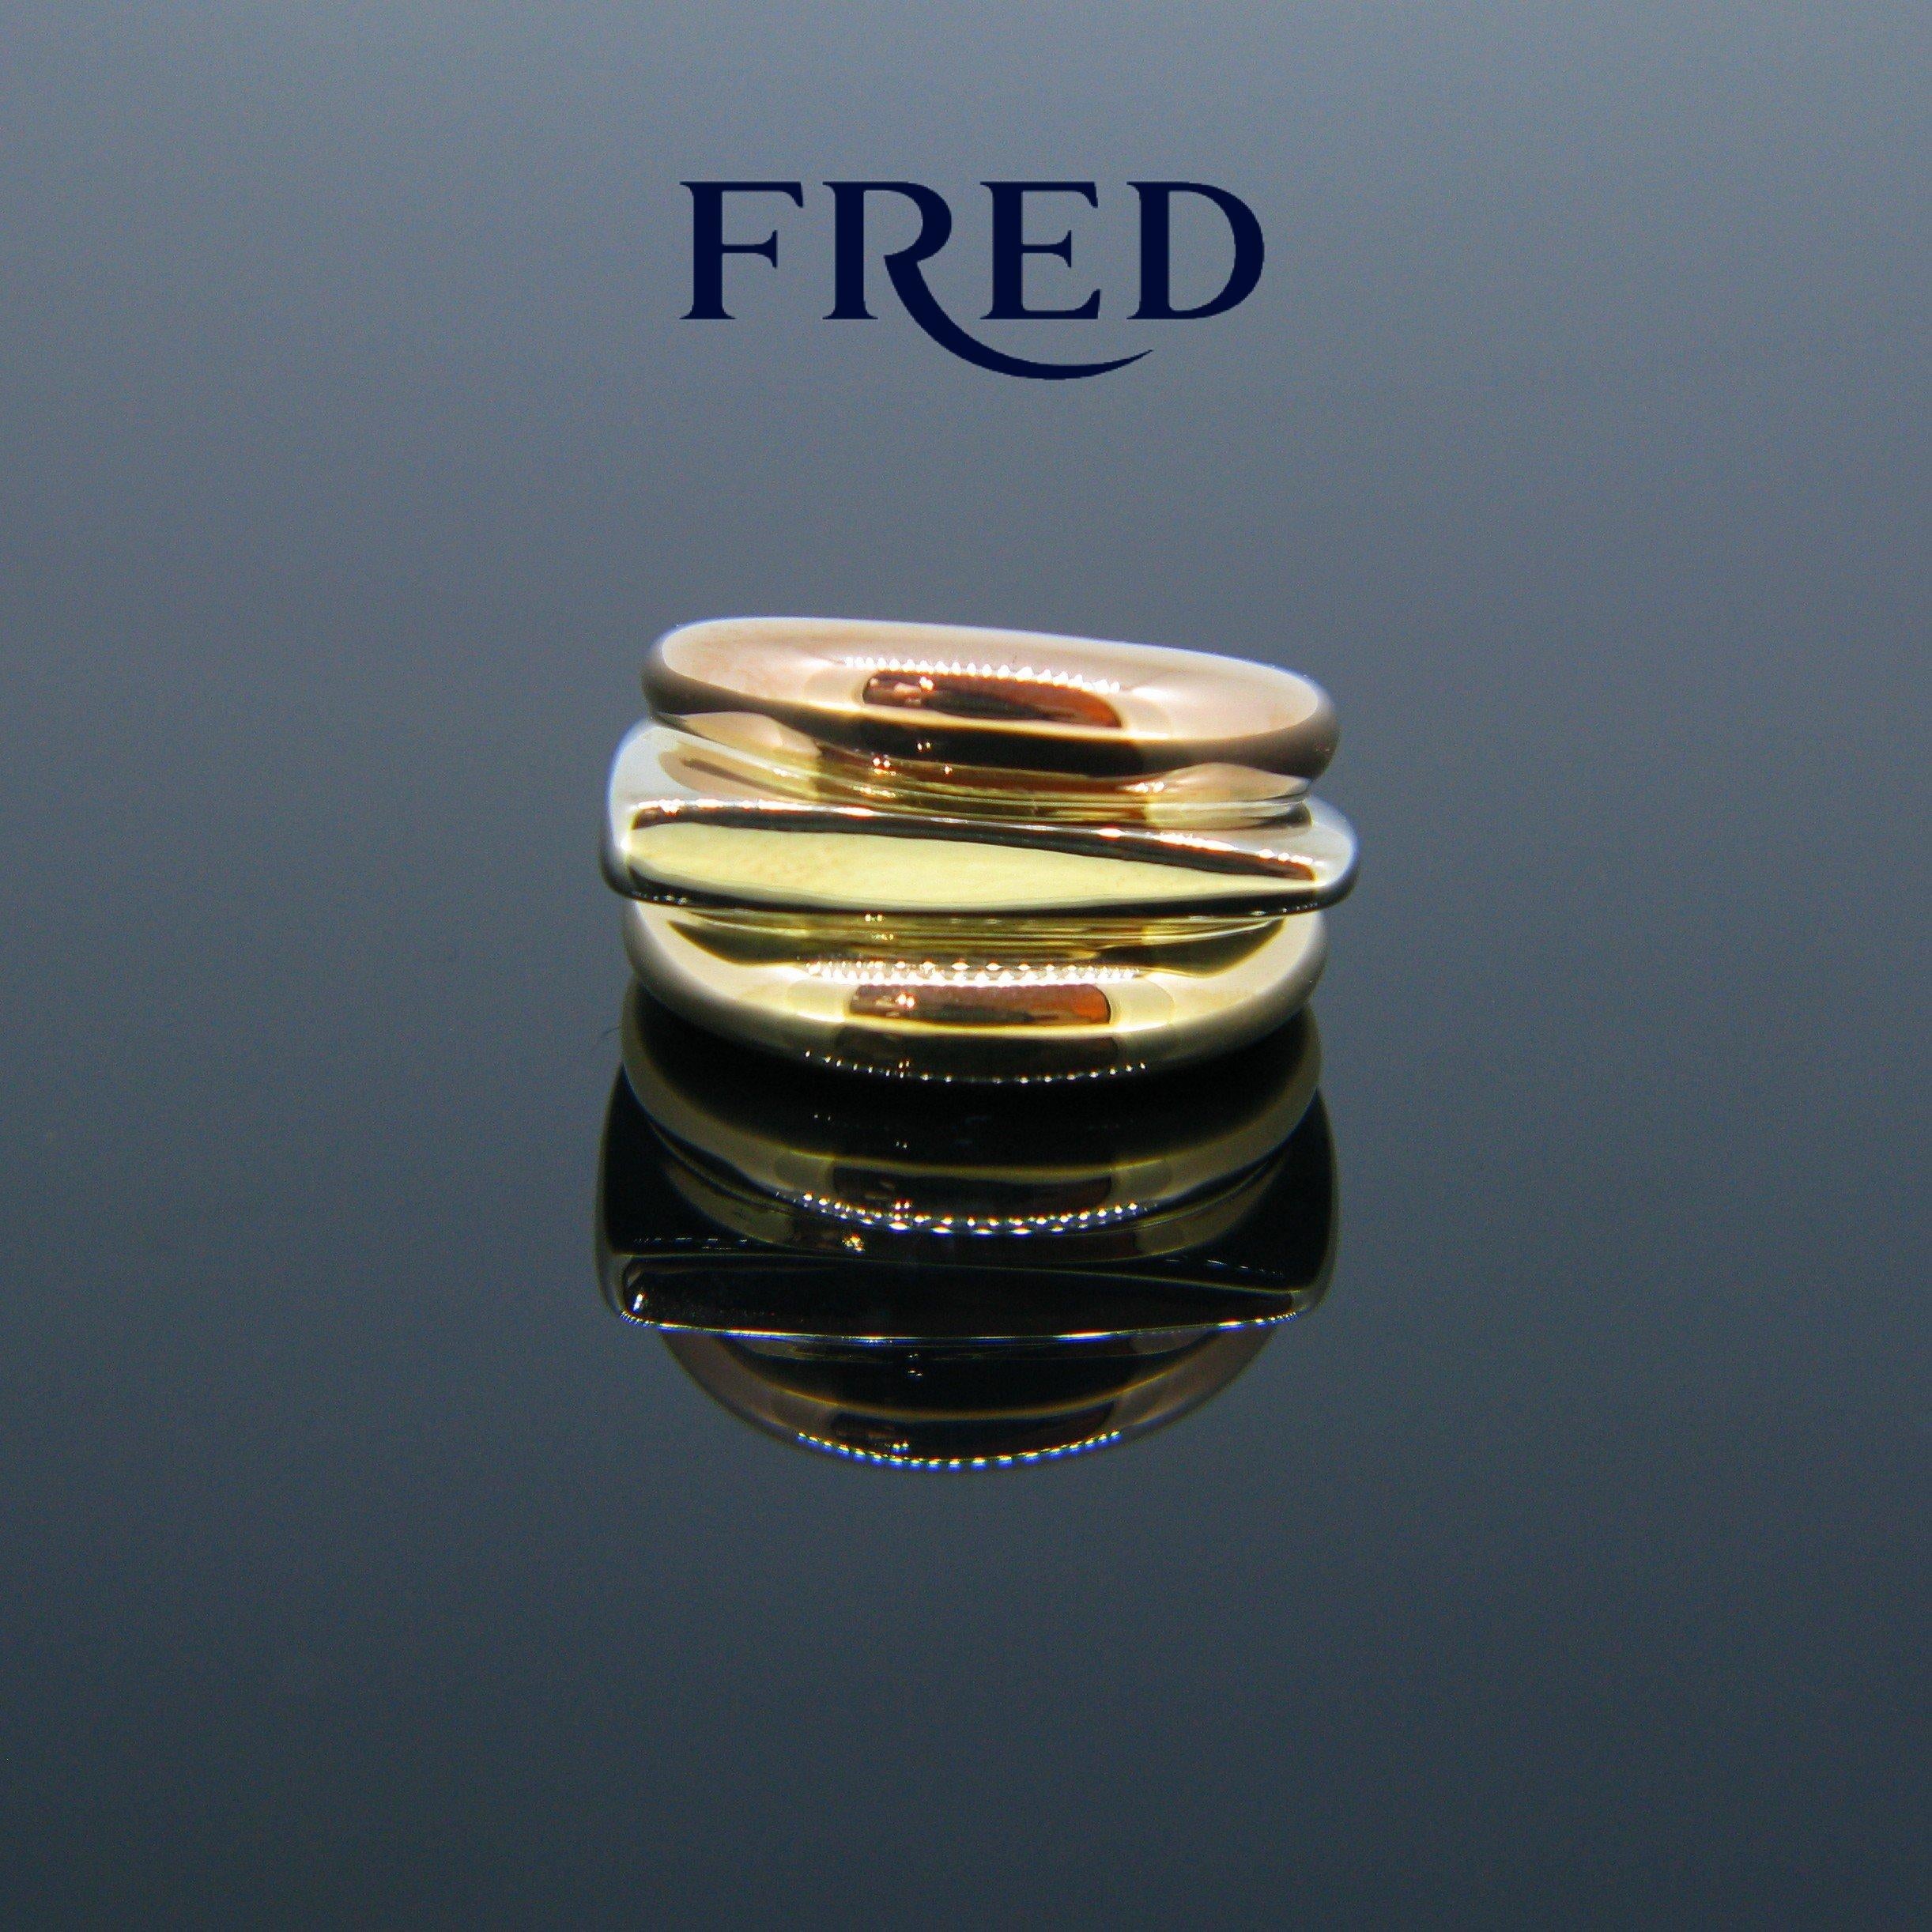 This fashionable ring is signed Fred Paris. It is made in 18kt white, yellow and rose gold. The collection is called Success. The ring is in great condition and has been polished as new. It is a very comfortable ring to wear every day with a cool